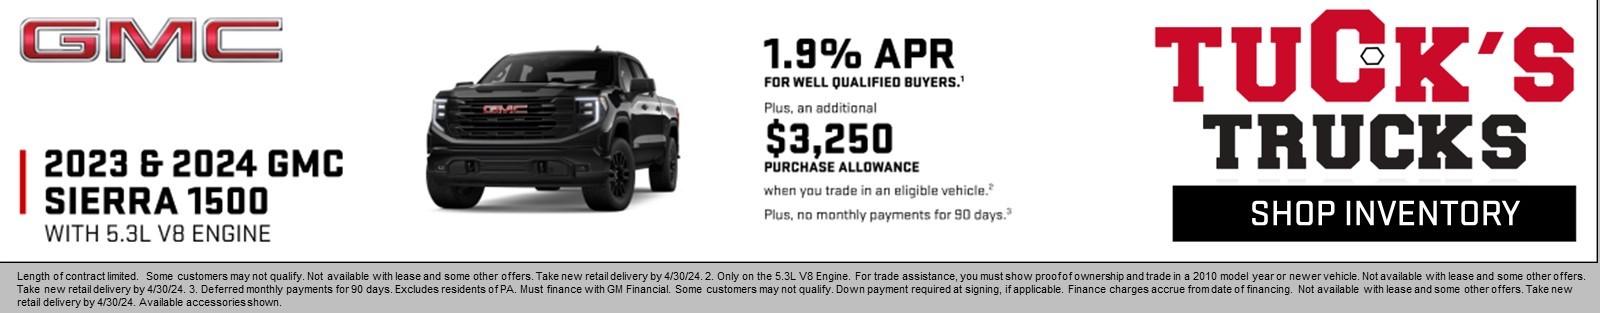 Save on a GMC Sierra 1500 with the 5.3L Engine.